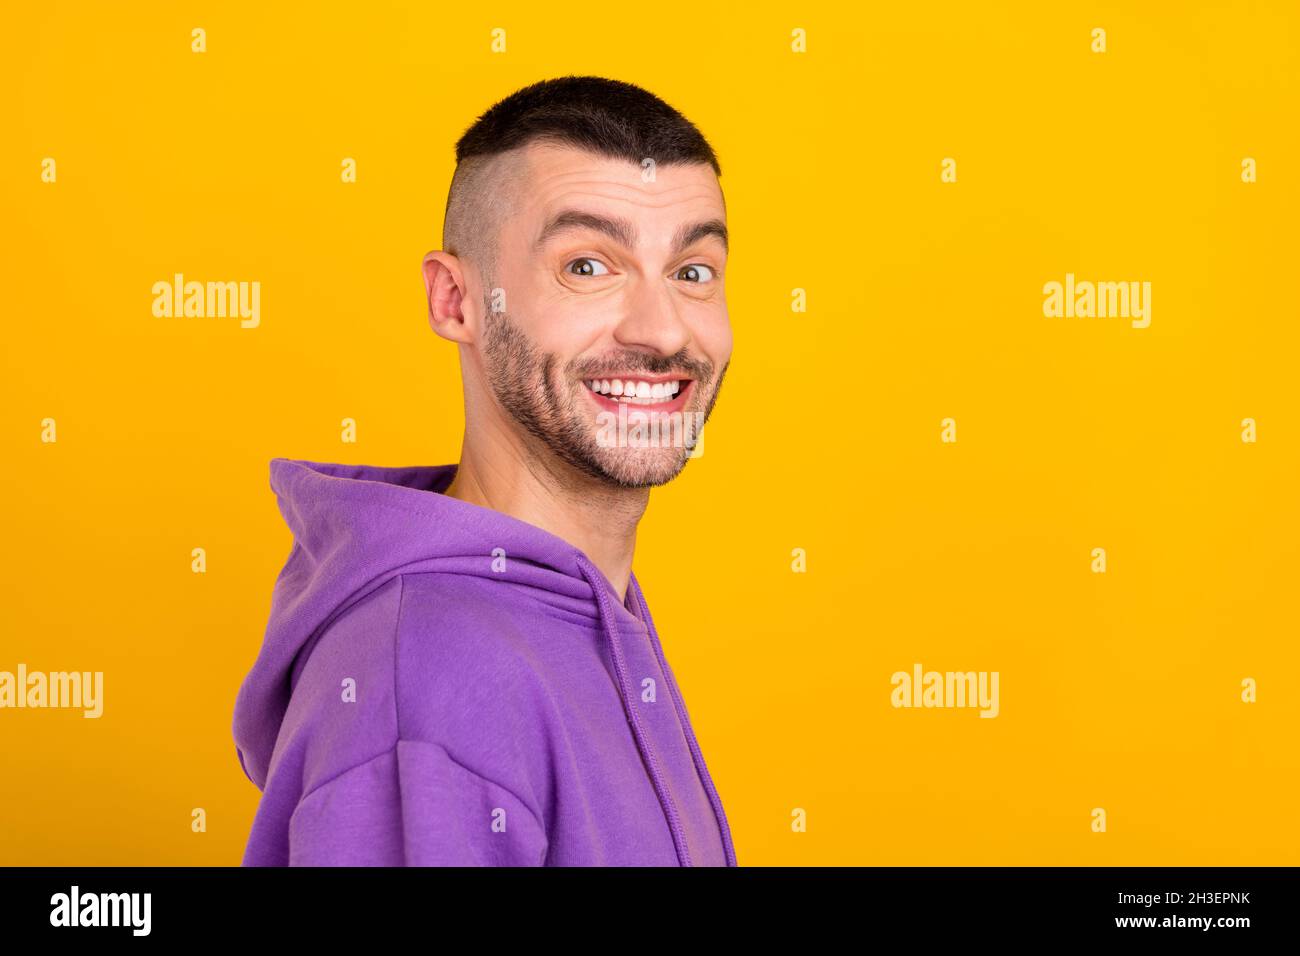 Photo portrait young man wearing purple hoody smiling cheerful isolated vivid yellow color background Stock Photo